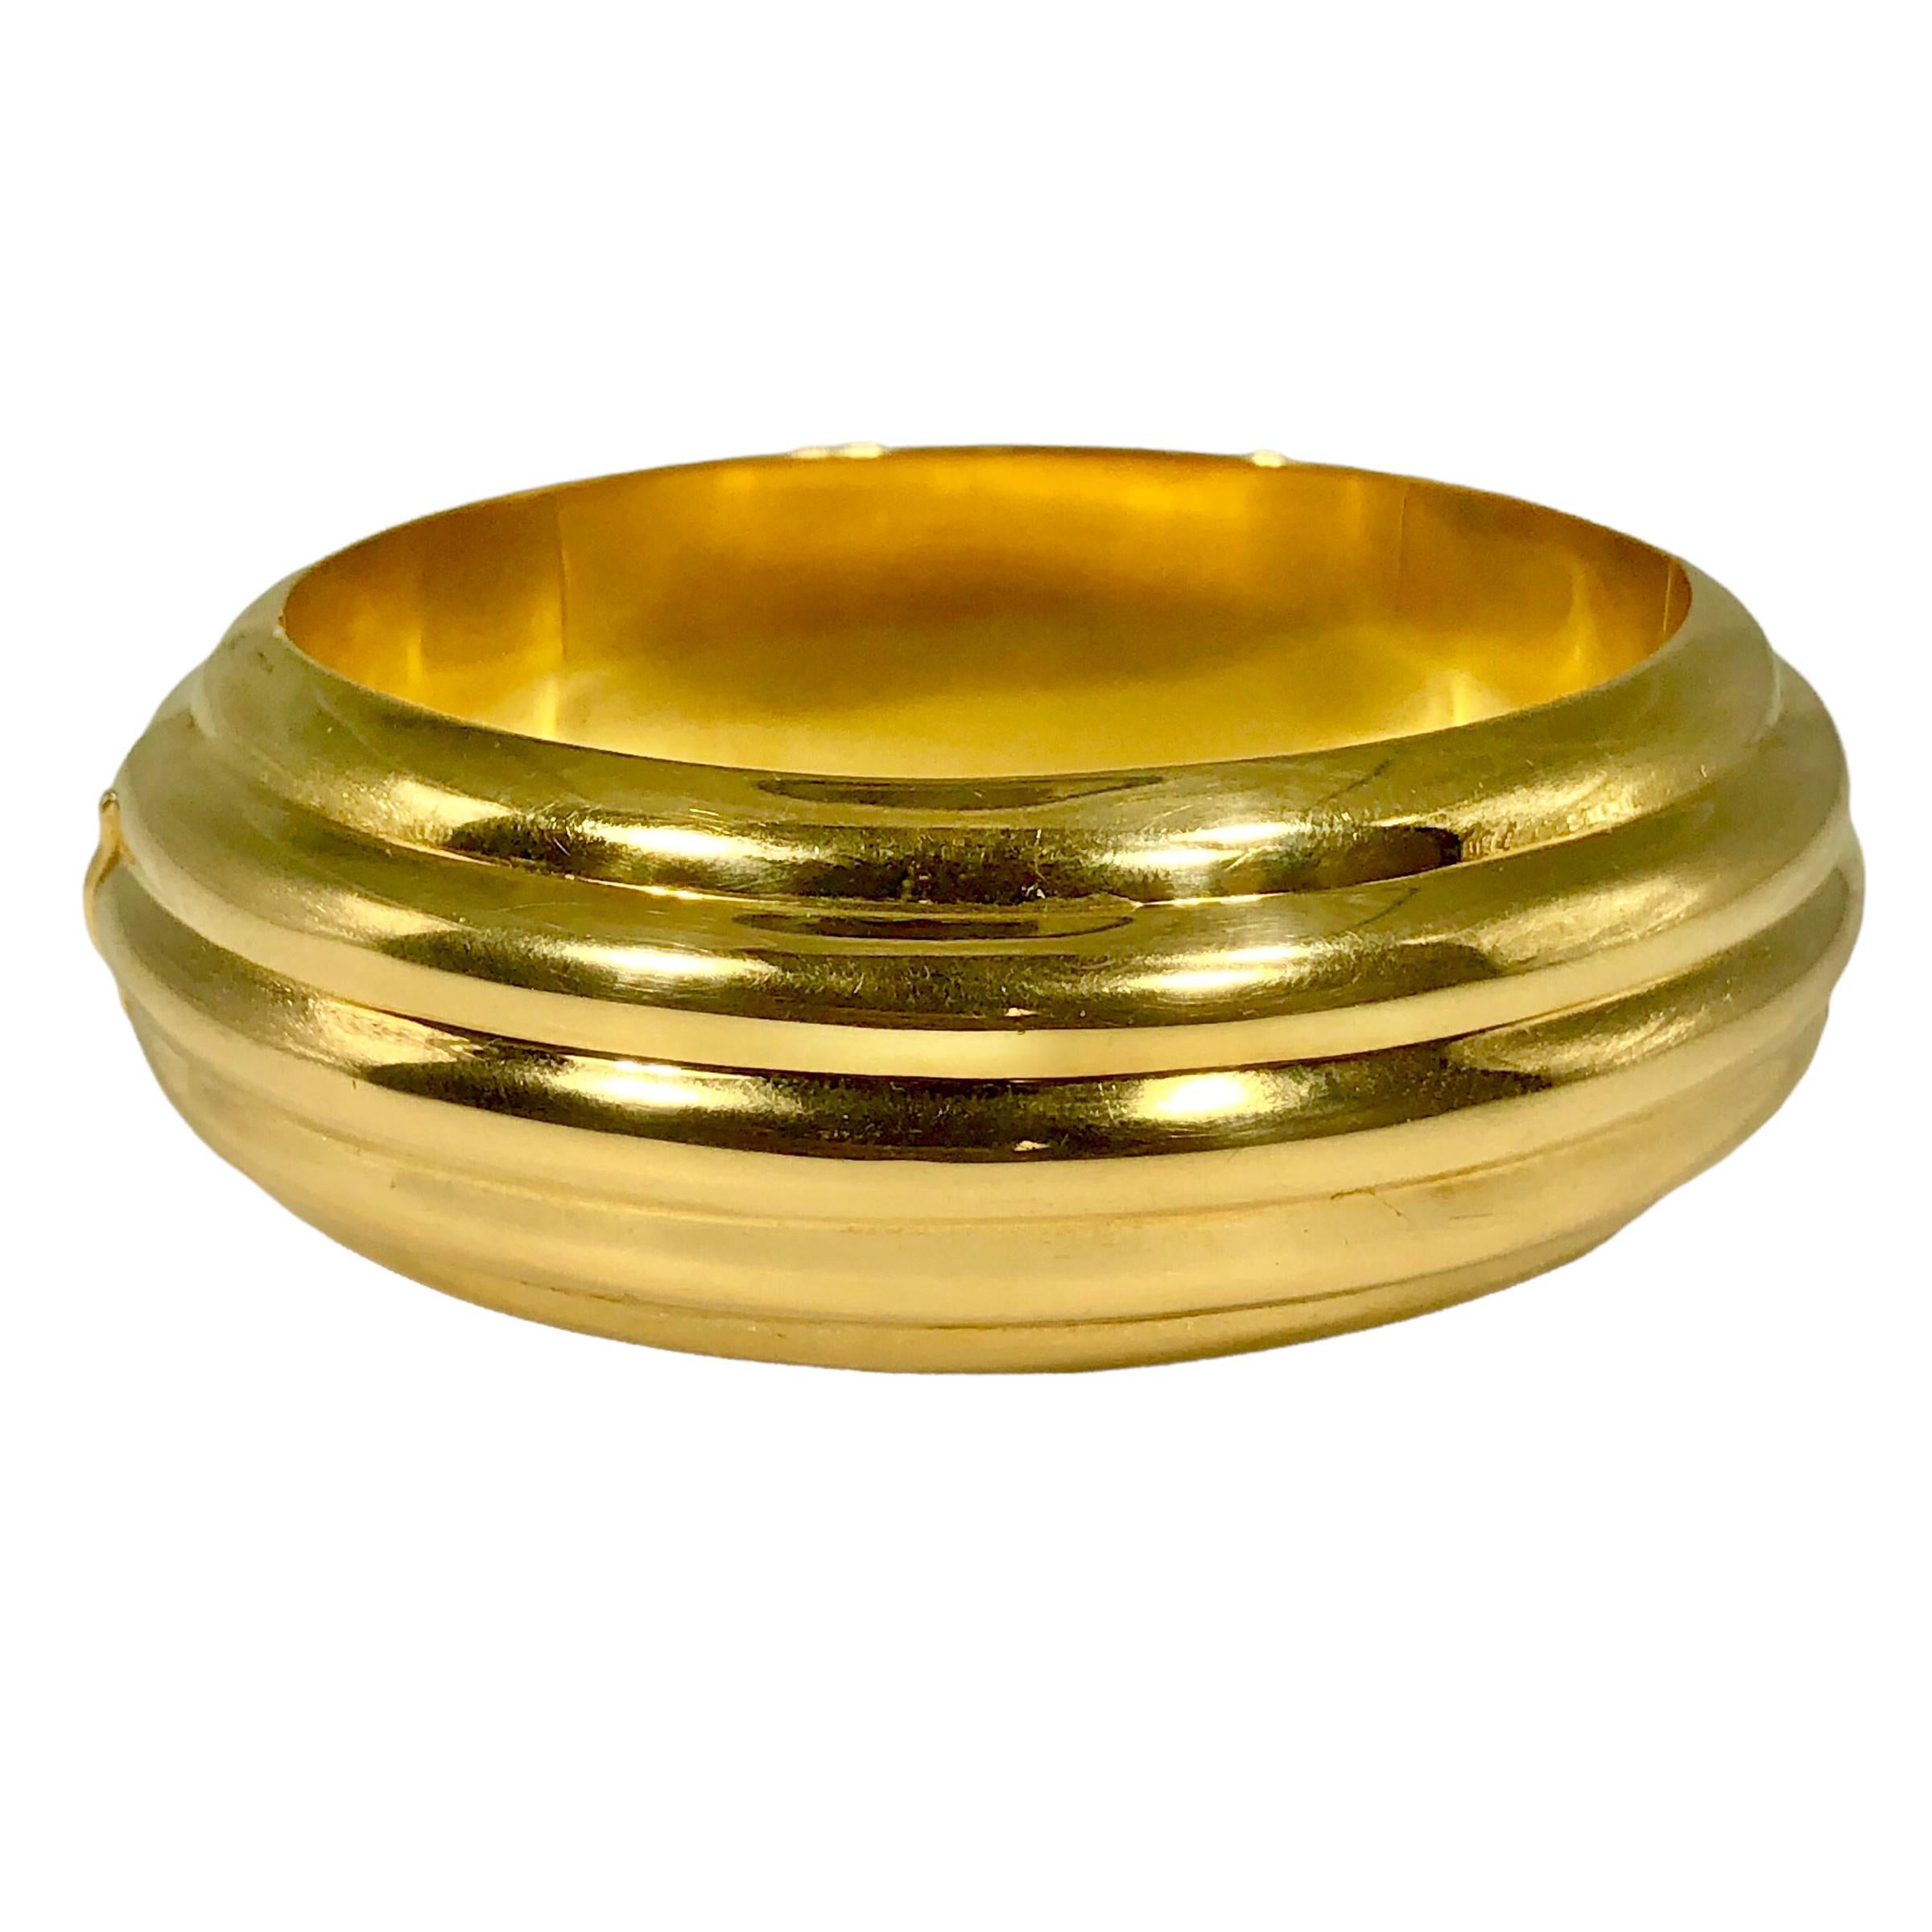 This pristine Late-20th Century, 18k yellow gold hinged cuff bracelet is certain to be a hit whenever it is worn. The bombe, fluted design is simple yet striking. The  quality is typical of the very best jewelry manufacturers. The bracelet measures